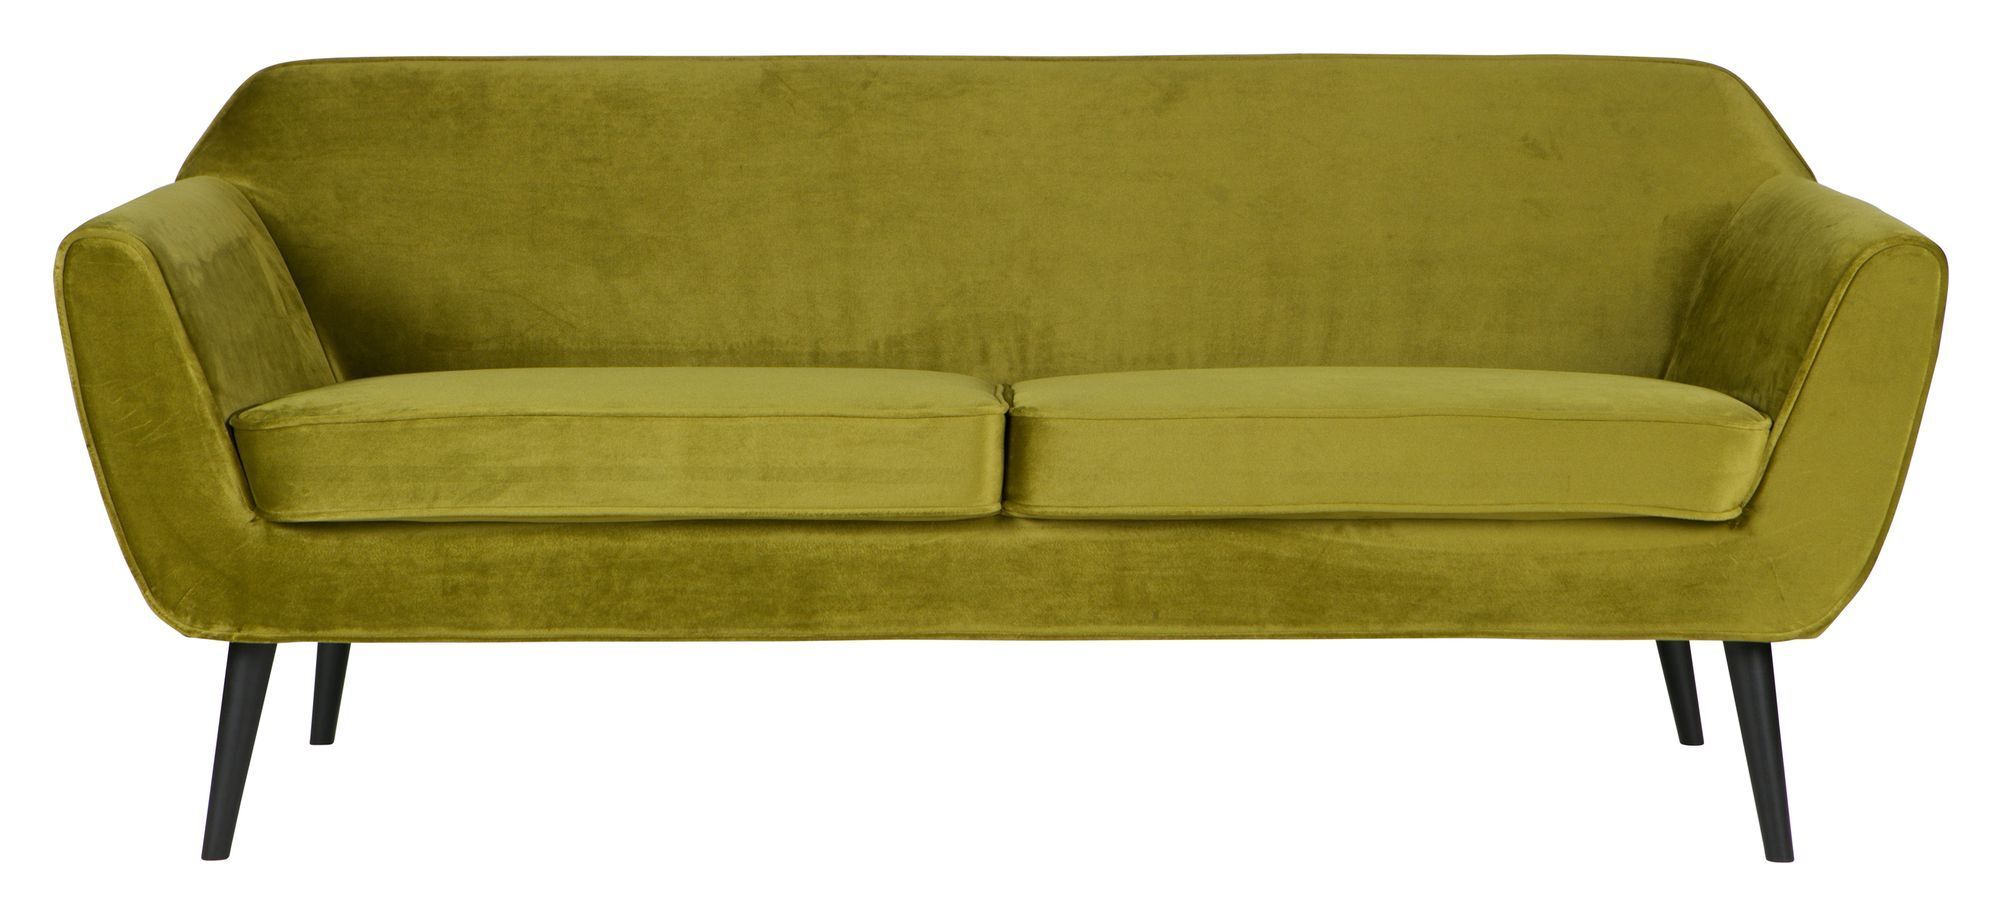 Woood Rocco 2-pers Sofa - Oliven Velour   Unoliving